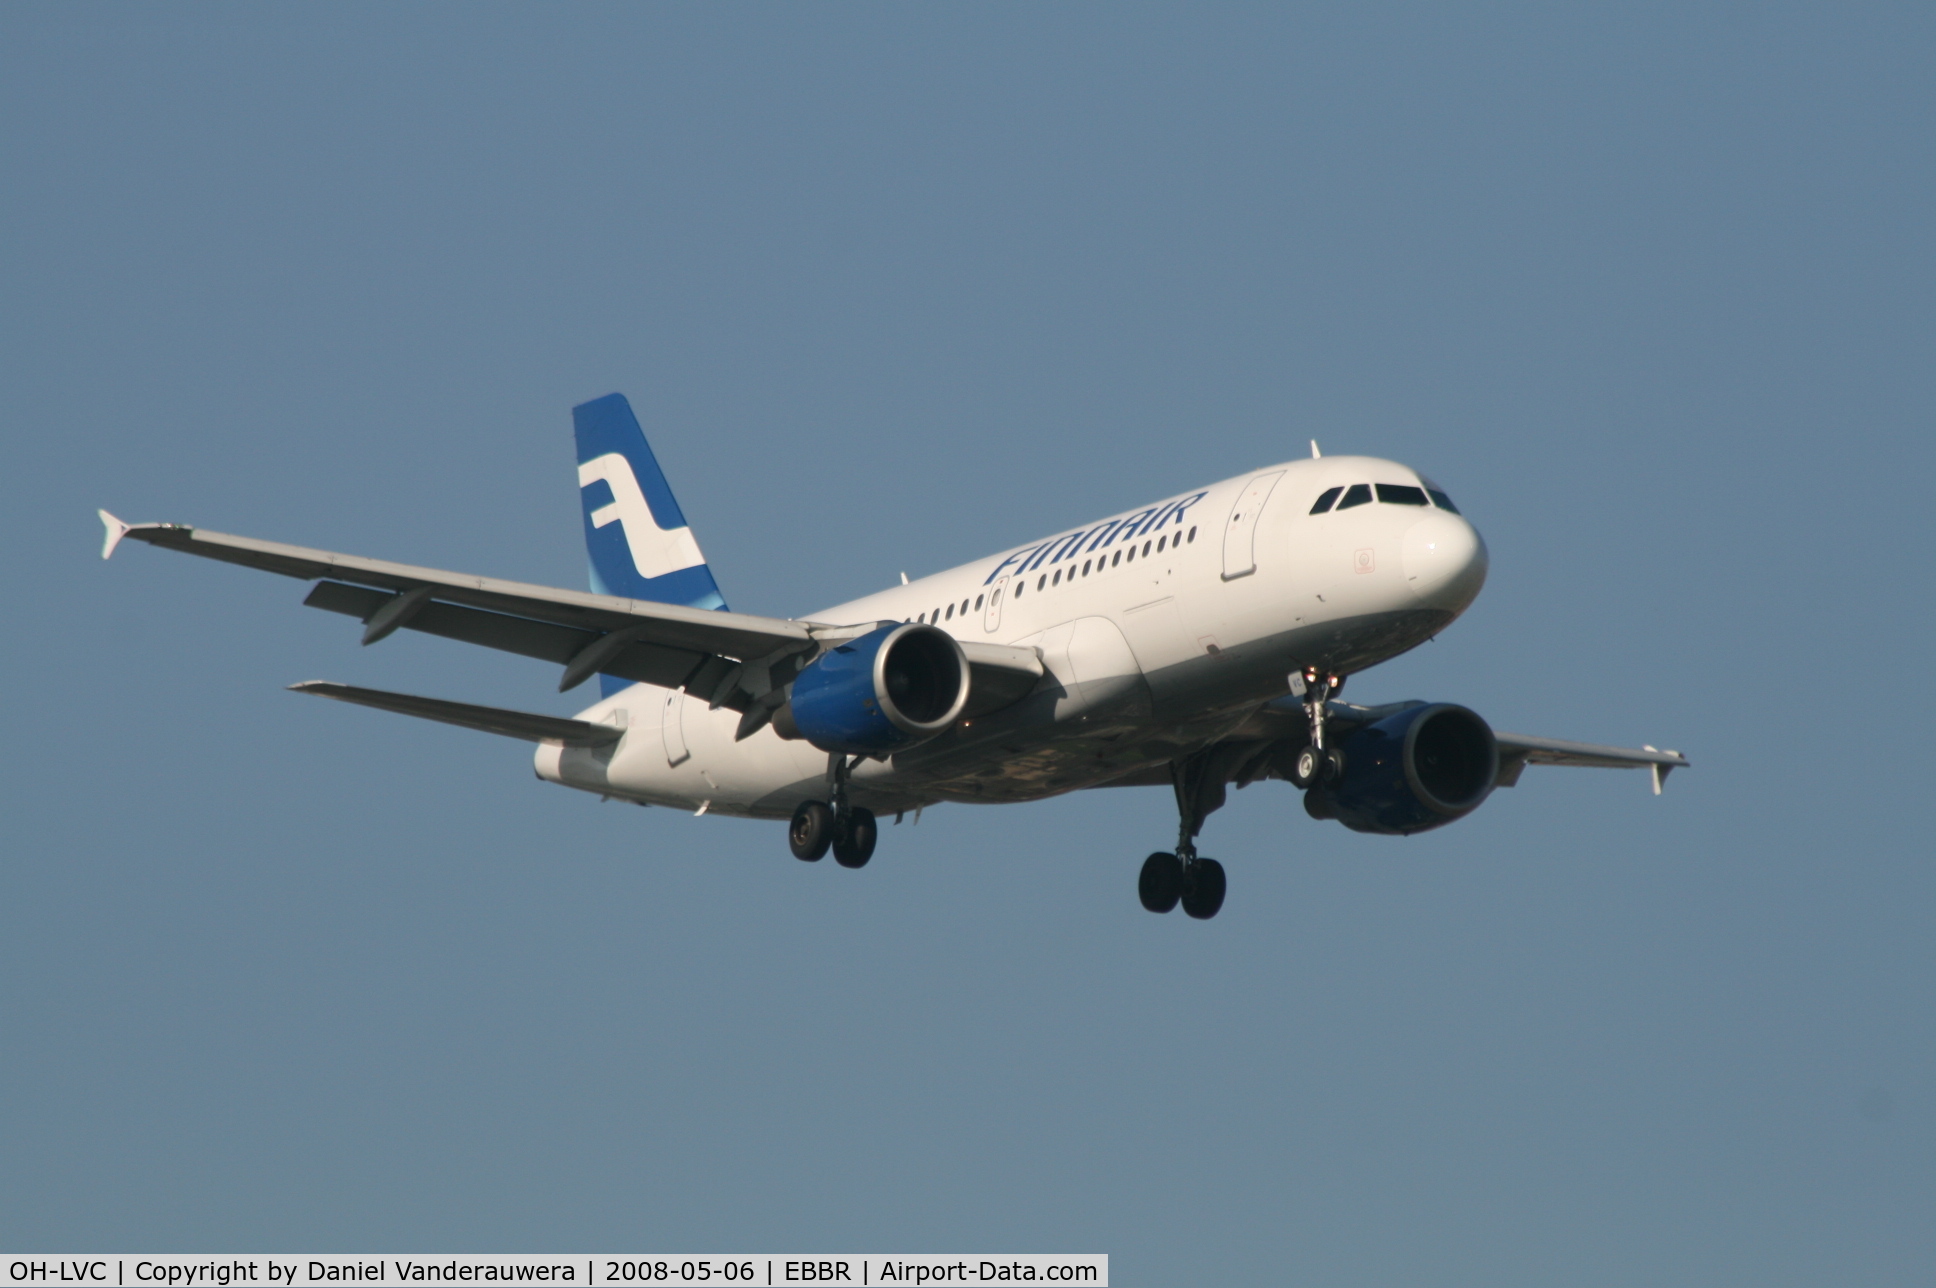 OH-LVC, 2000 Airbus A319-112 C/N 1309, arrival of flight AY811 to rwy 02